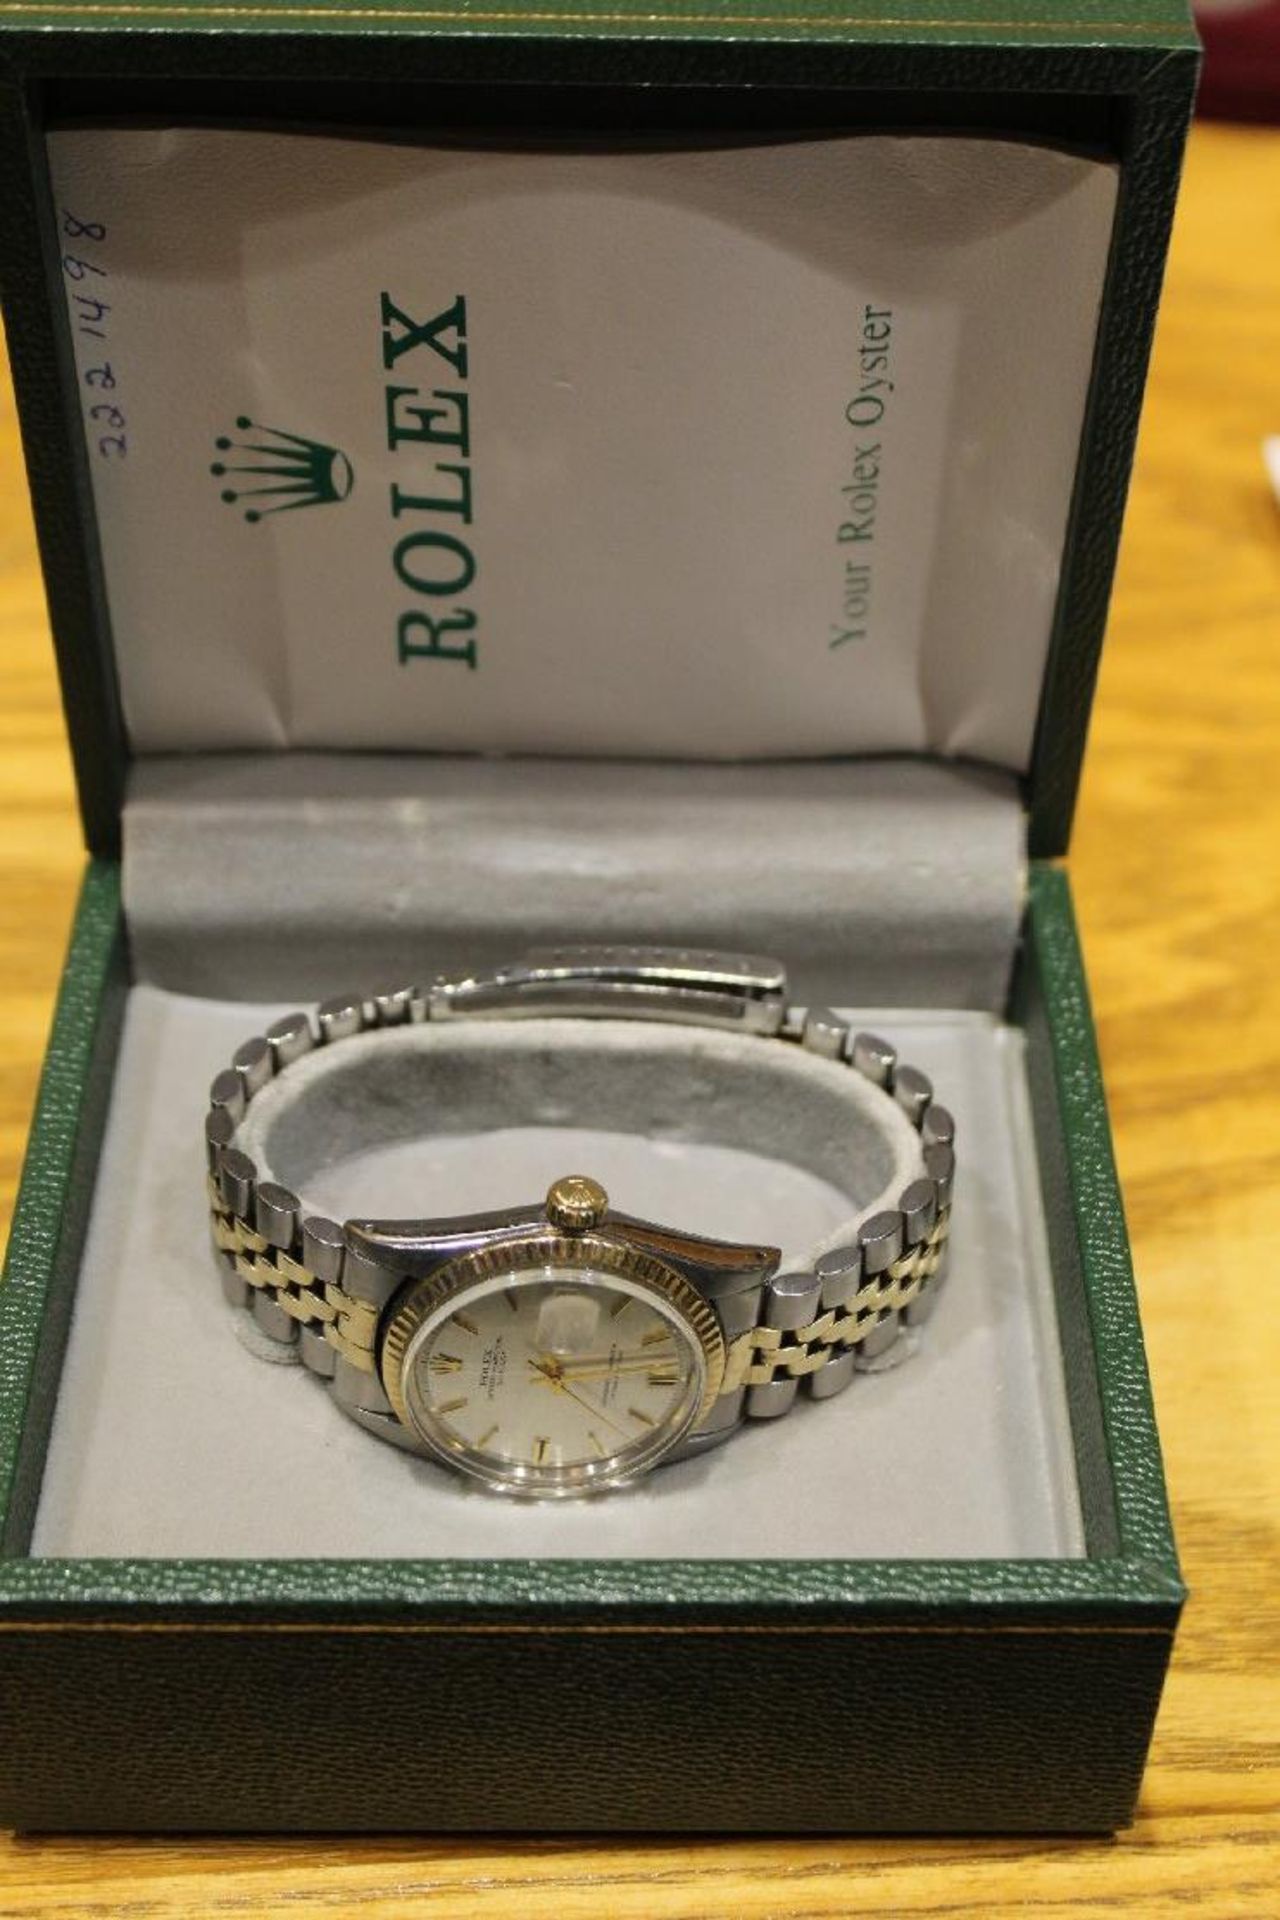 Rolex Oyster Watch. Sterling Silver & 14kt Yellow Gold. SN 2221498 - Purchased in 1971